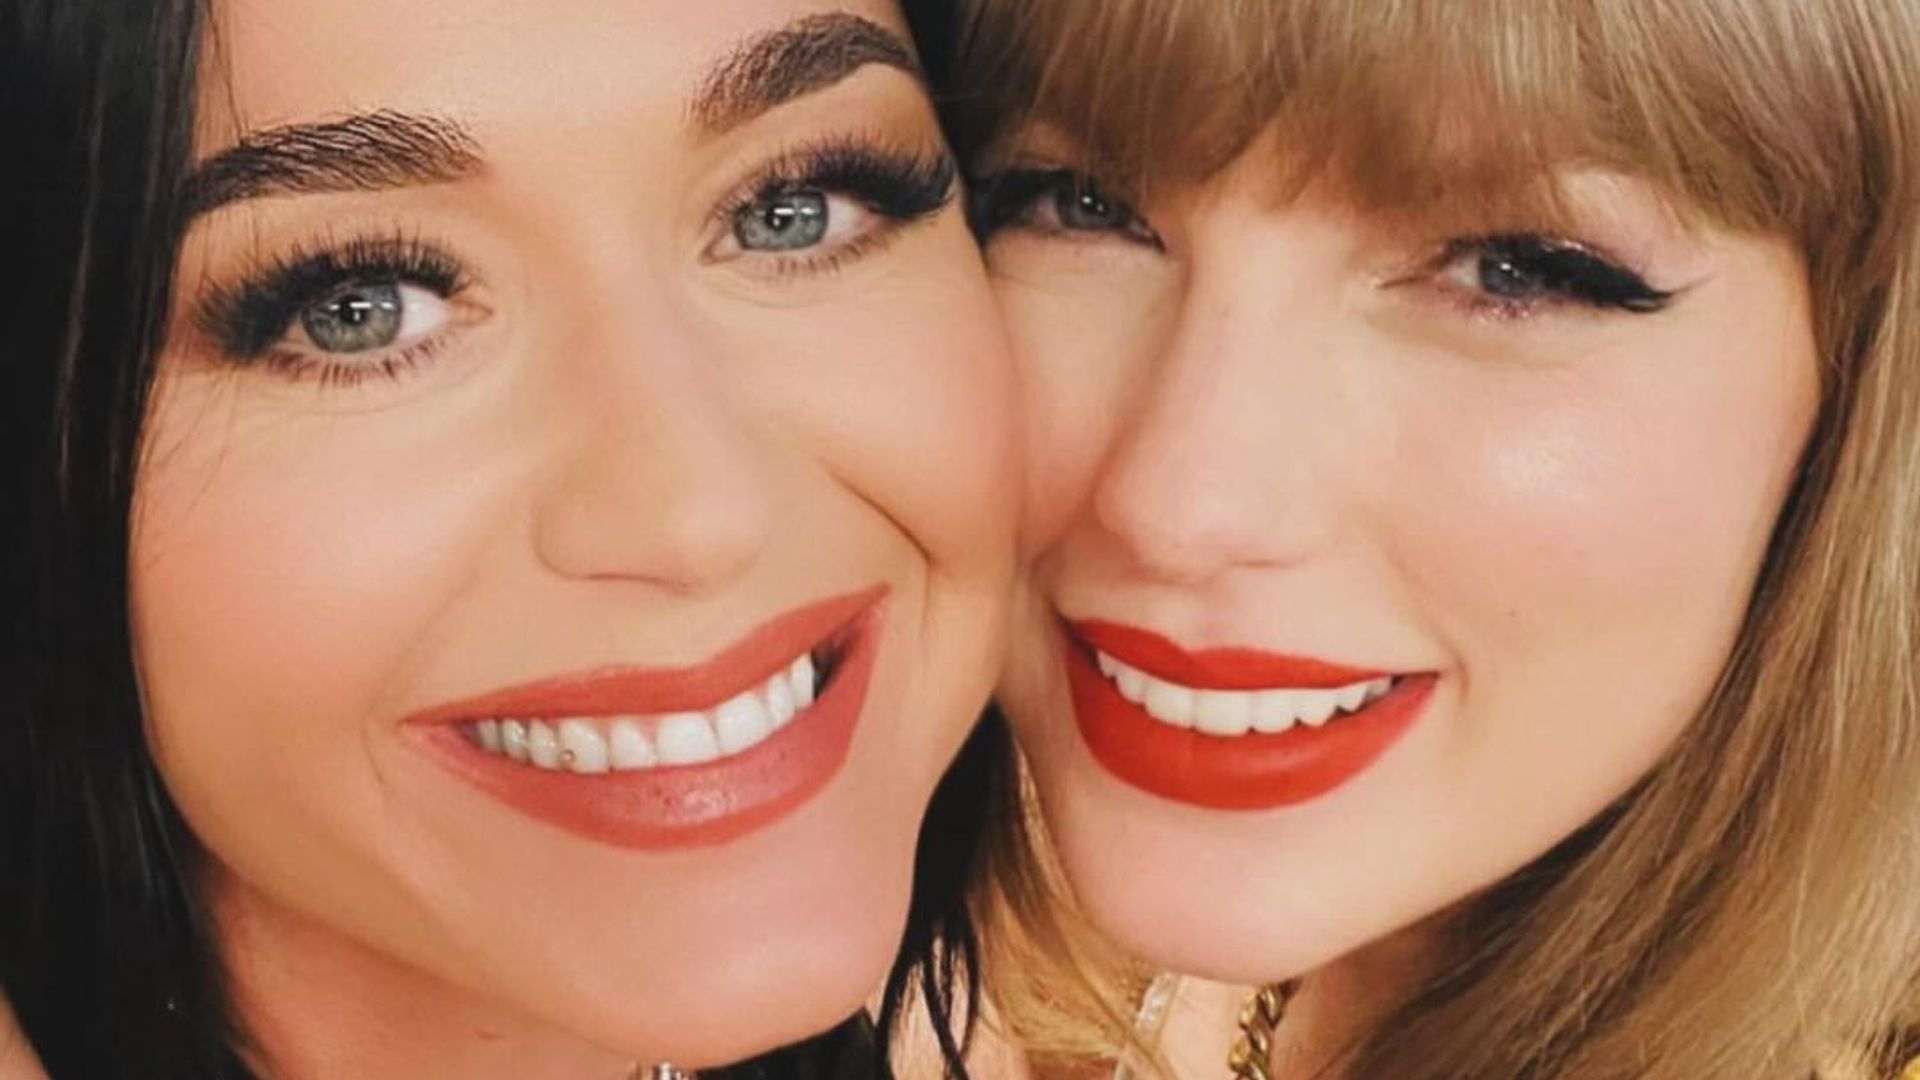 Taylor Swift's close-up selfie sparks reaction as she poses with Katy Perry - proving there's bad blood